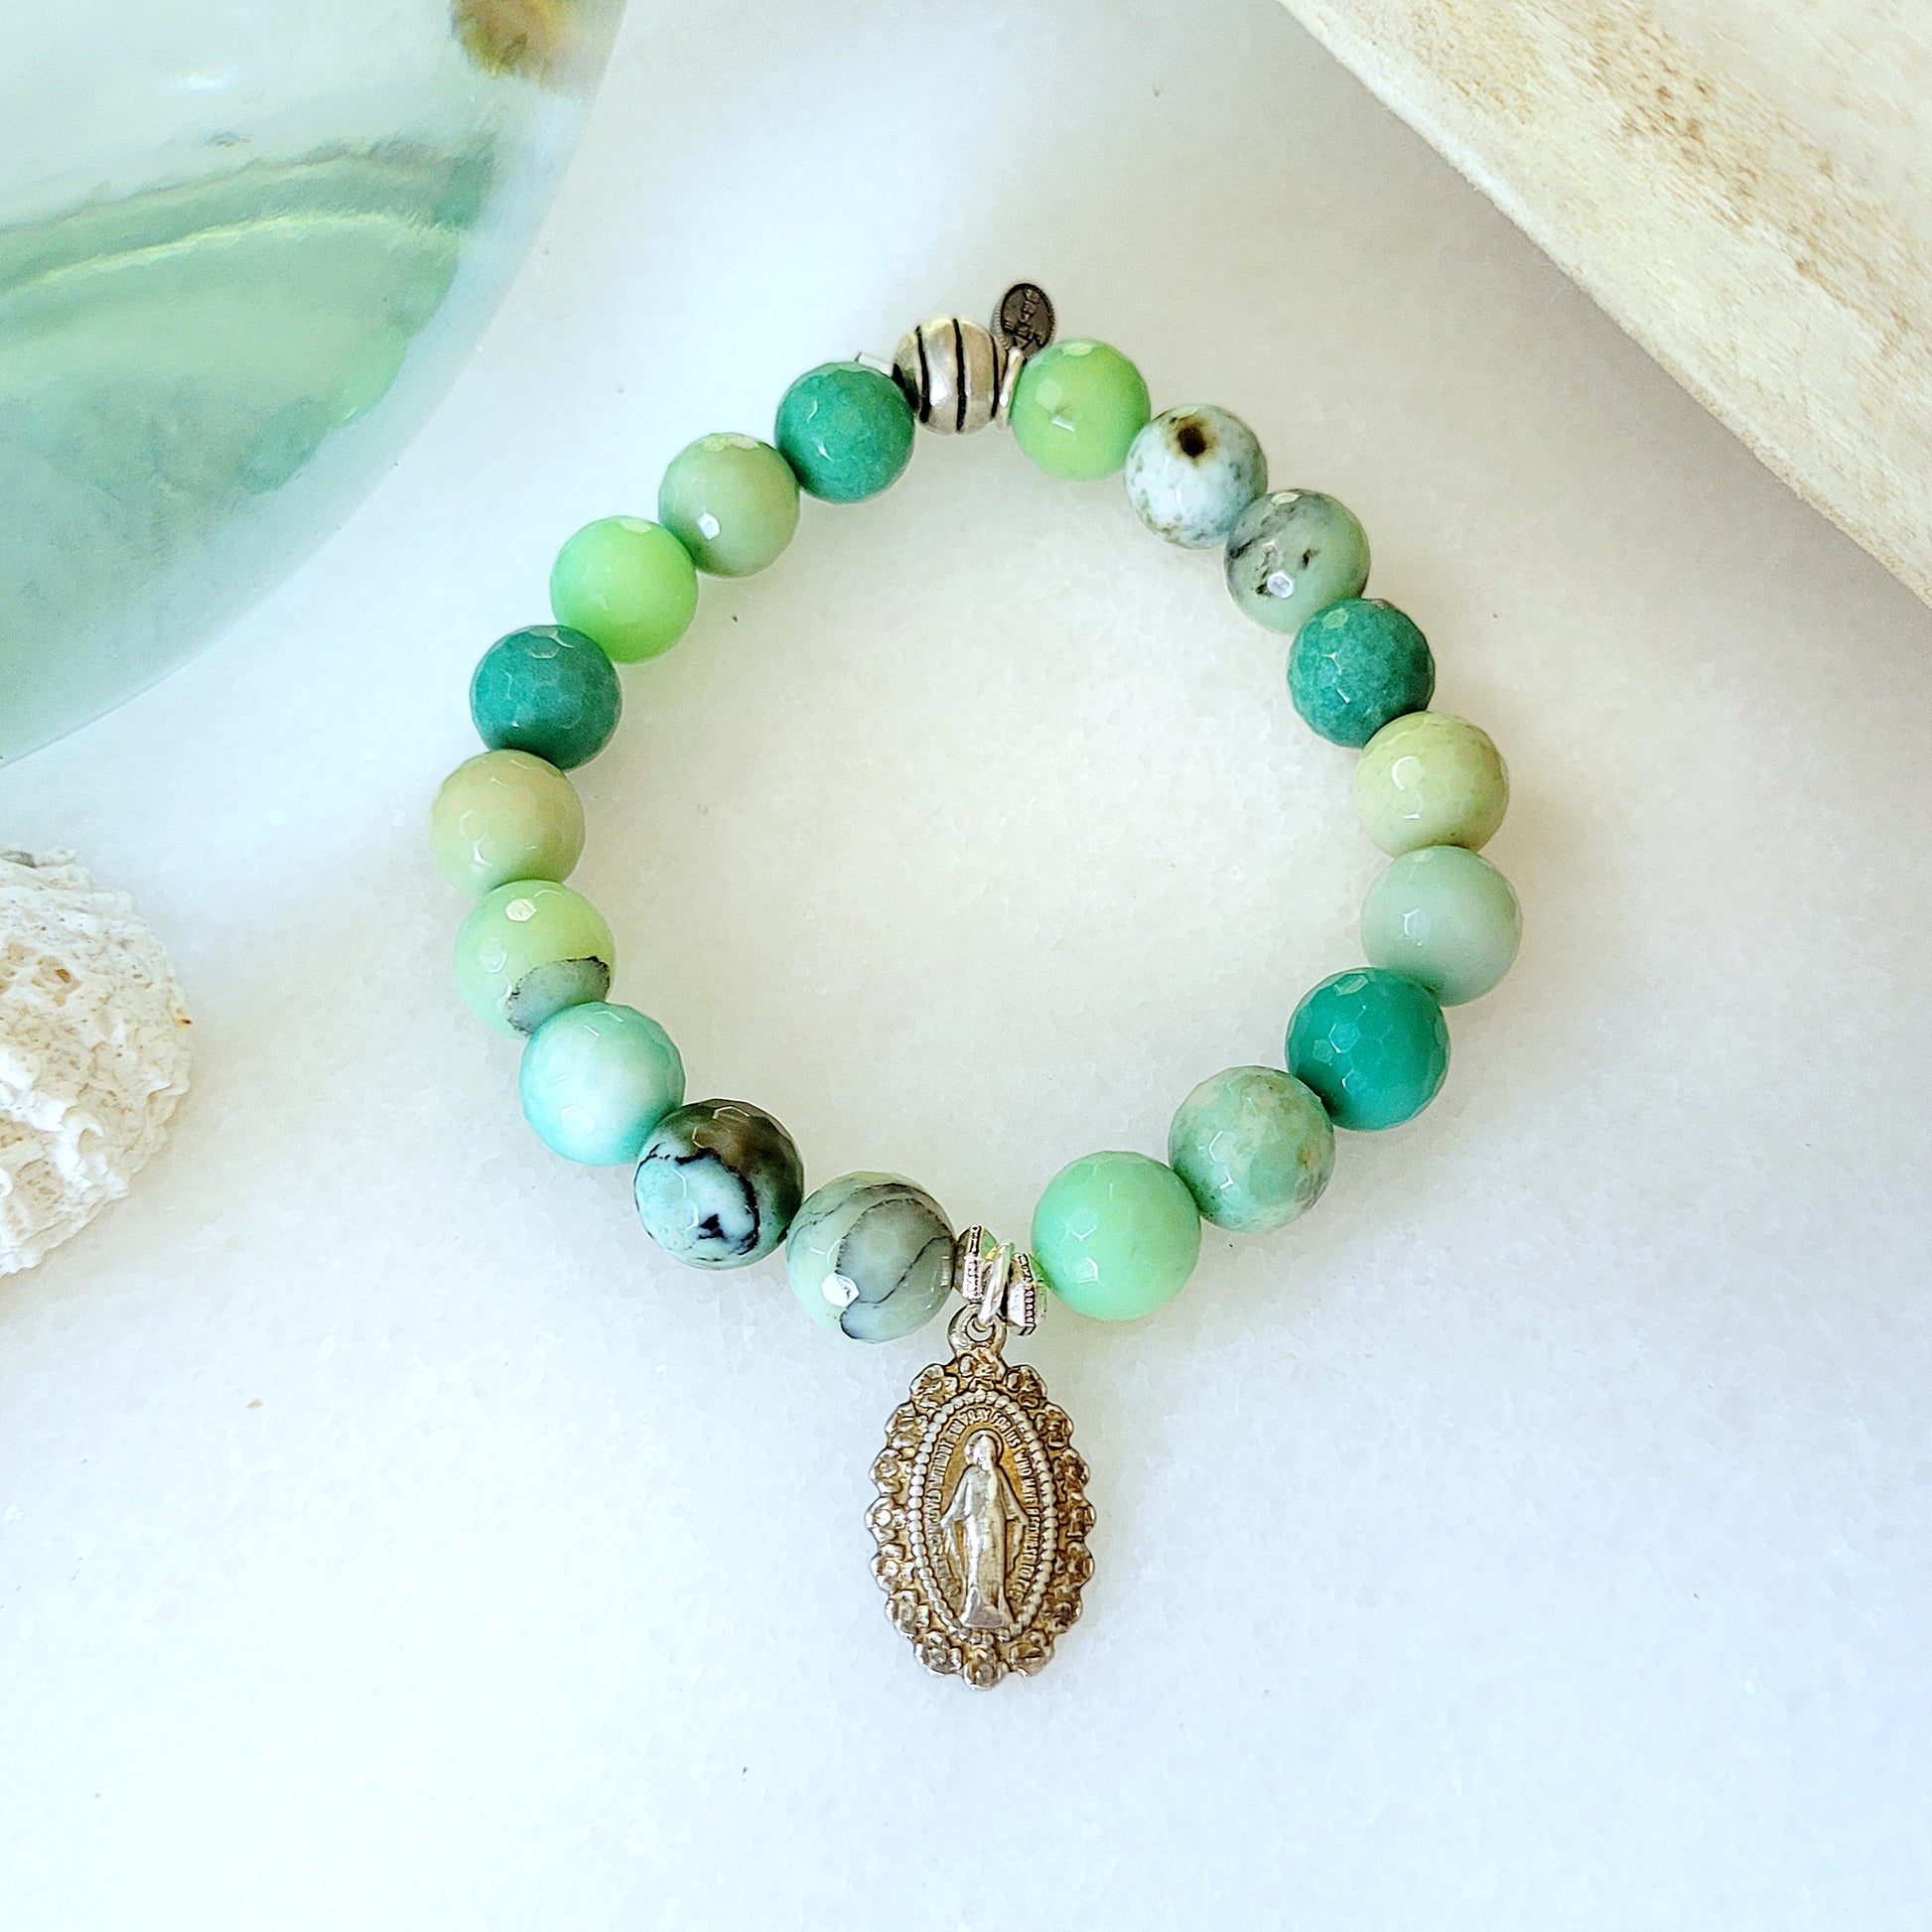 Chrysoprase 10mm Faceted Beaded Bracelet w/ Miraculous Medal of Mary in Sterling Silver - Afterlife Jewelry Designs